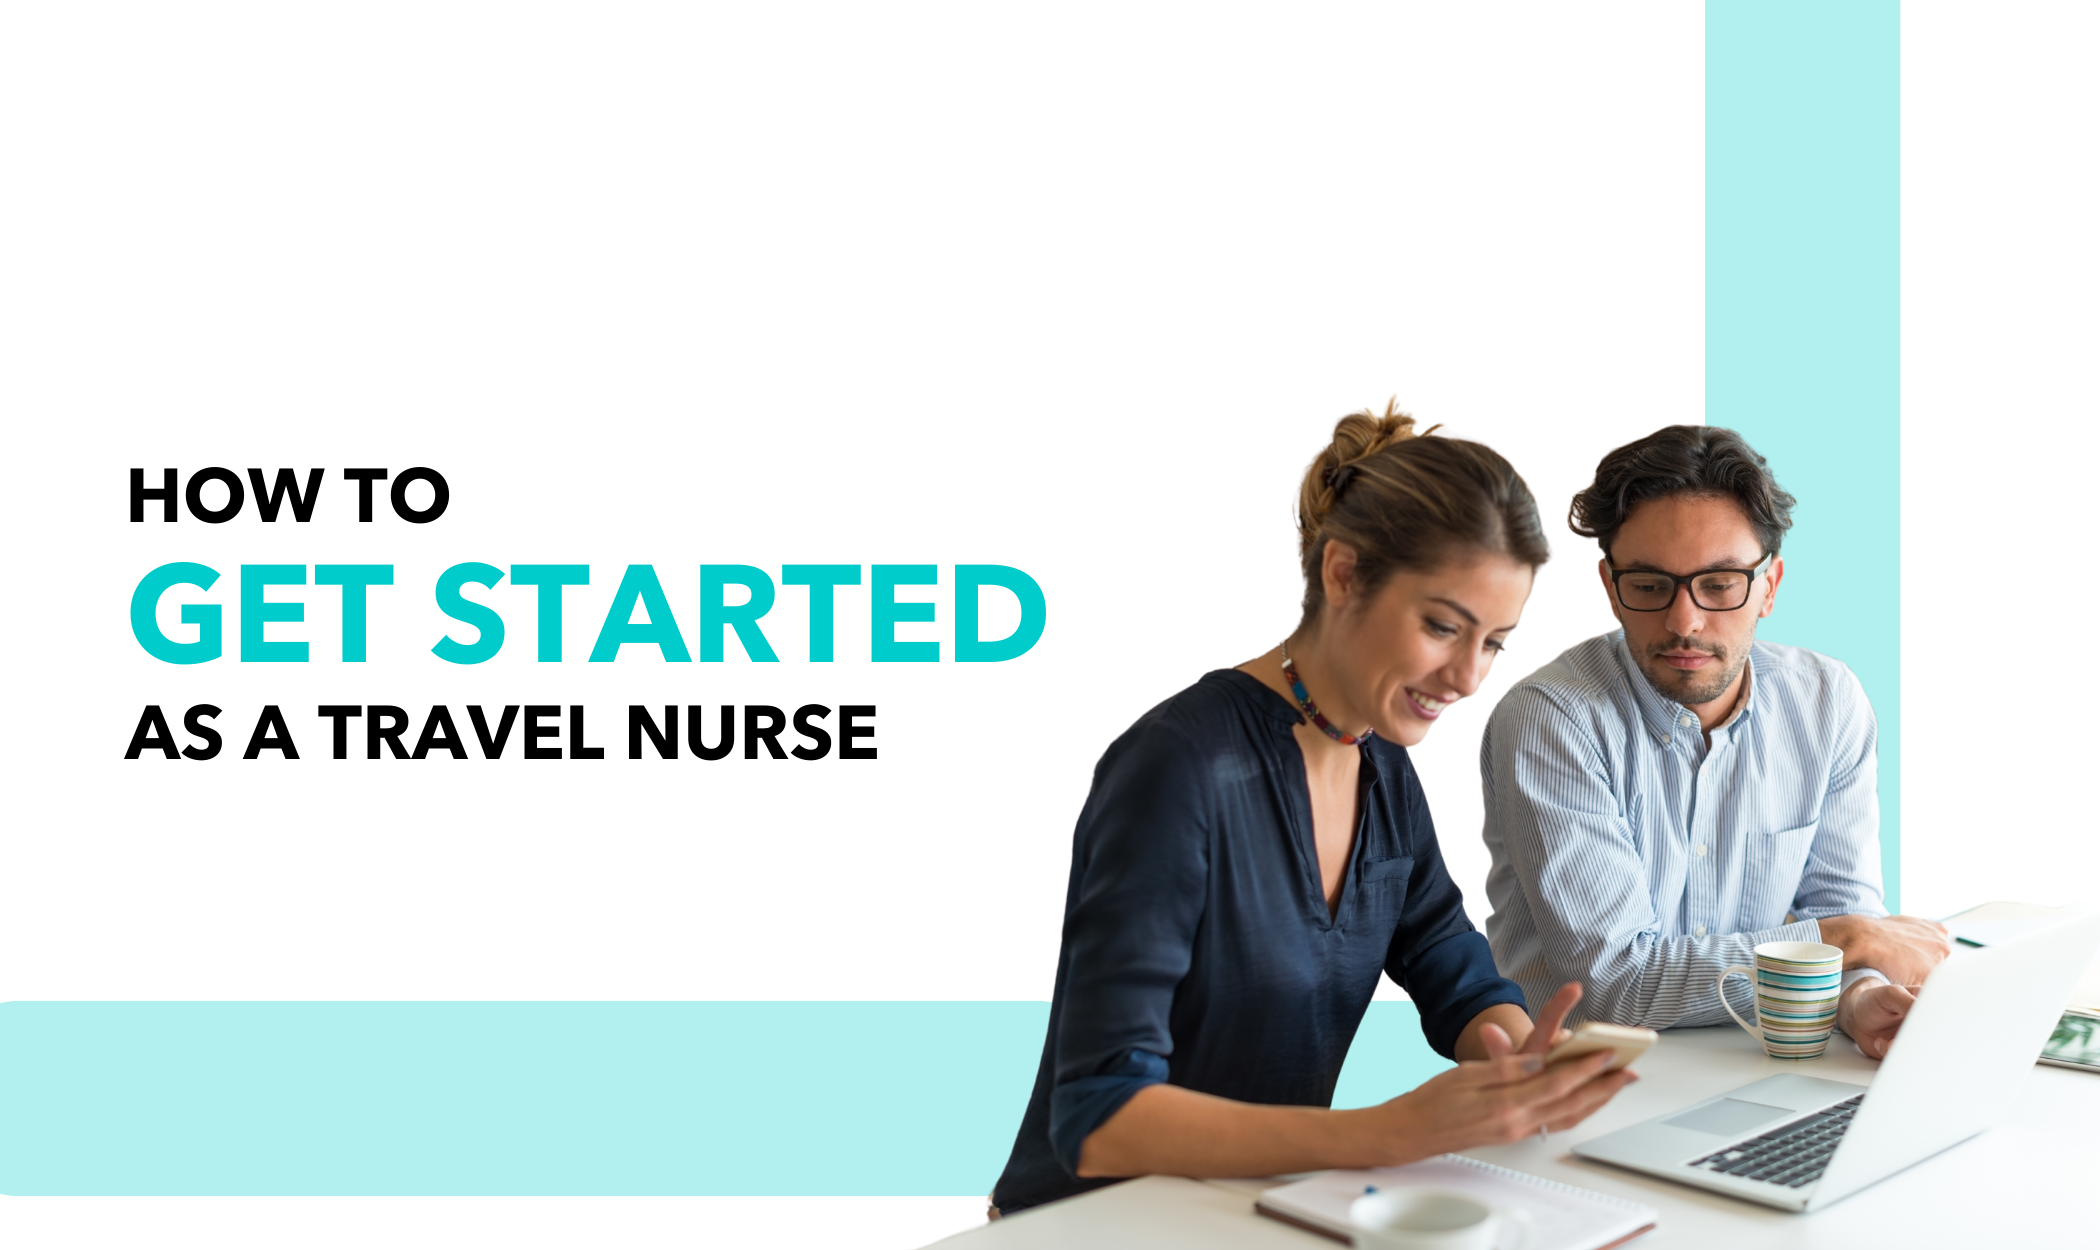 How to get started as a travel nurse